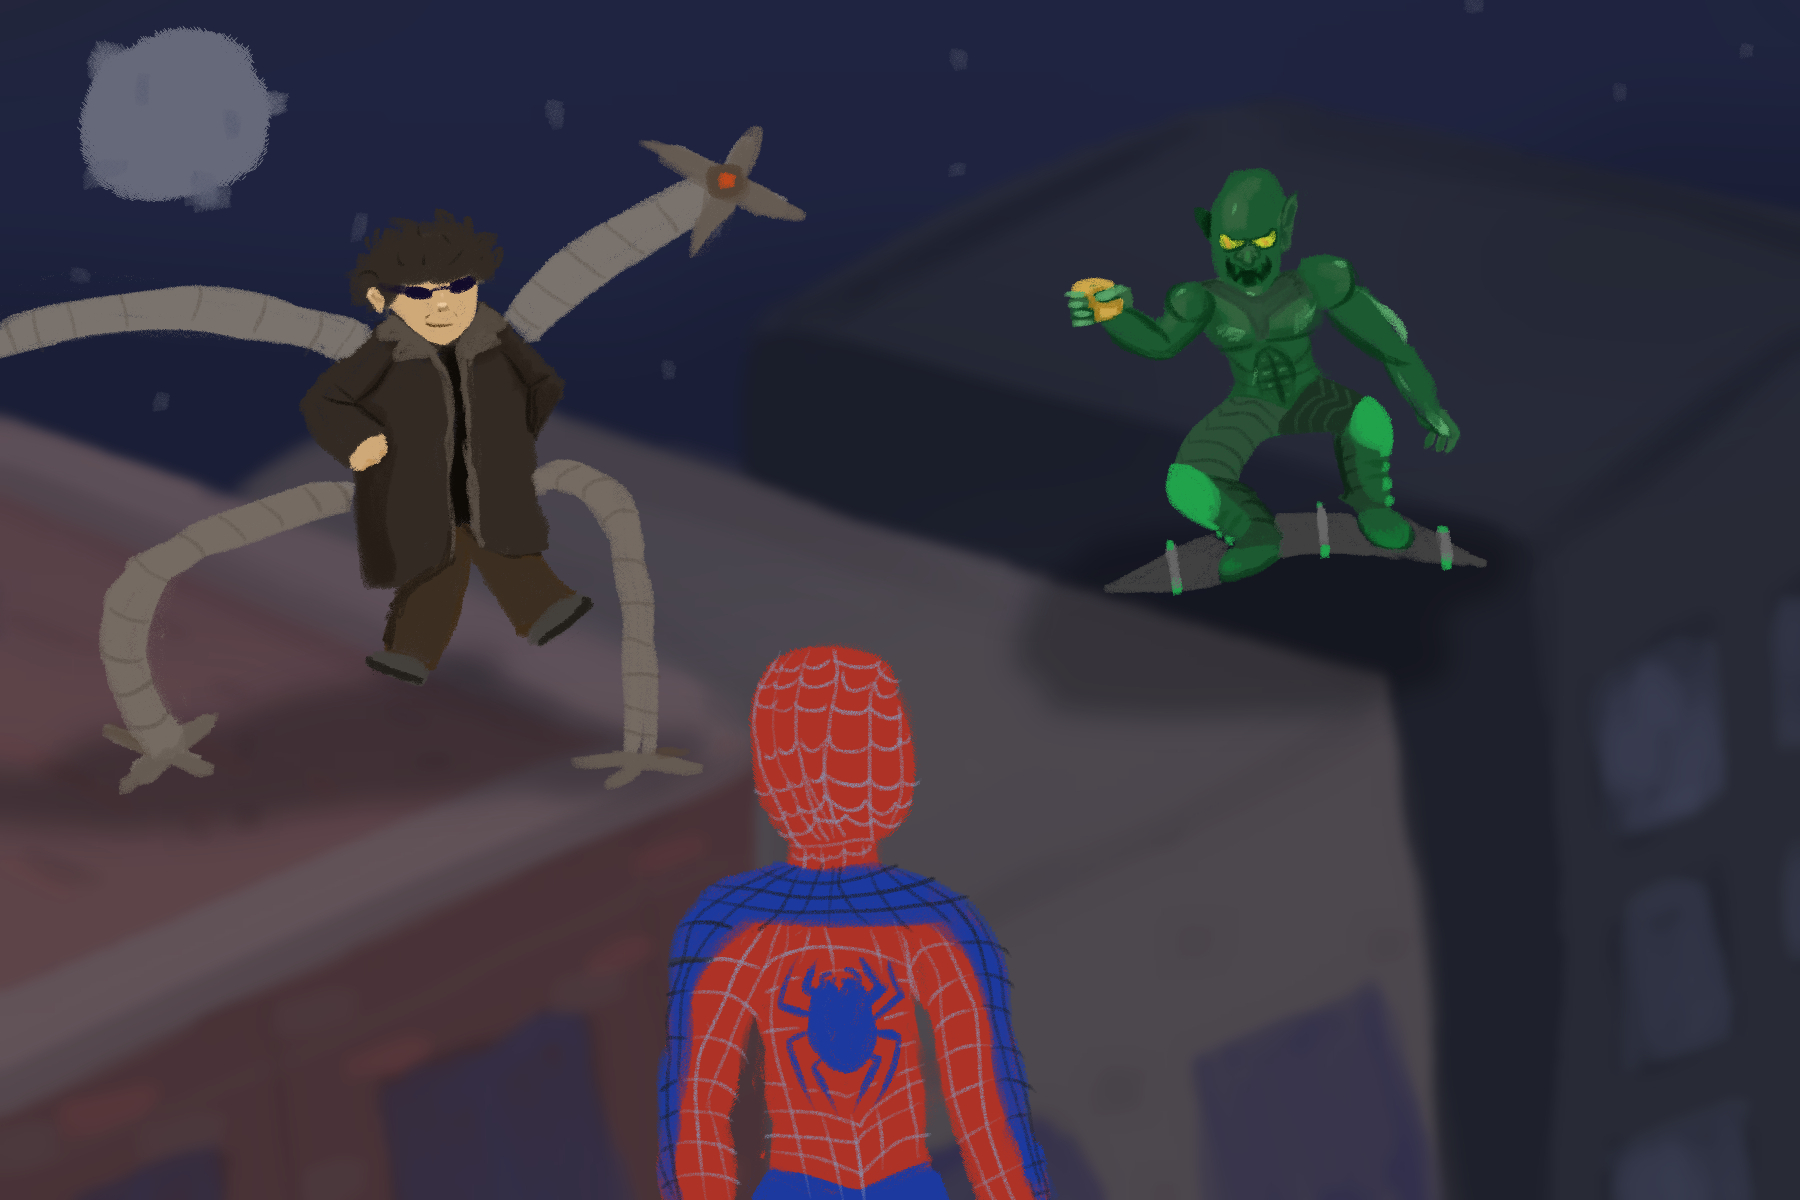 Spider-Man up against the most iconic villains.